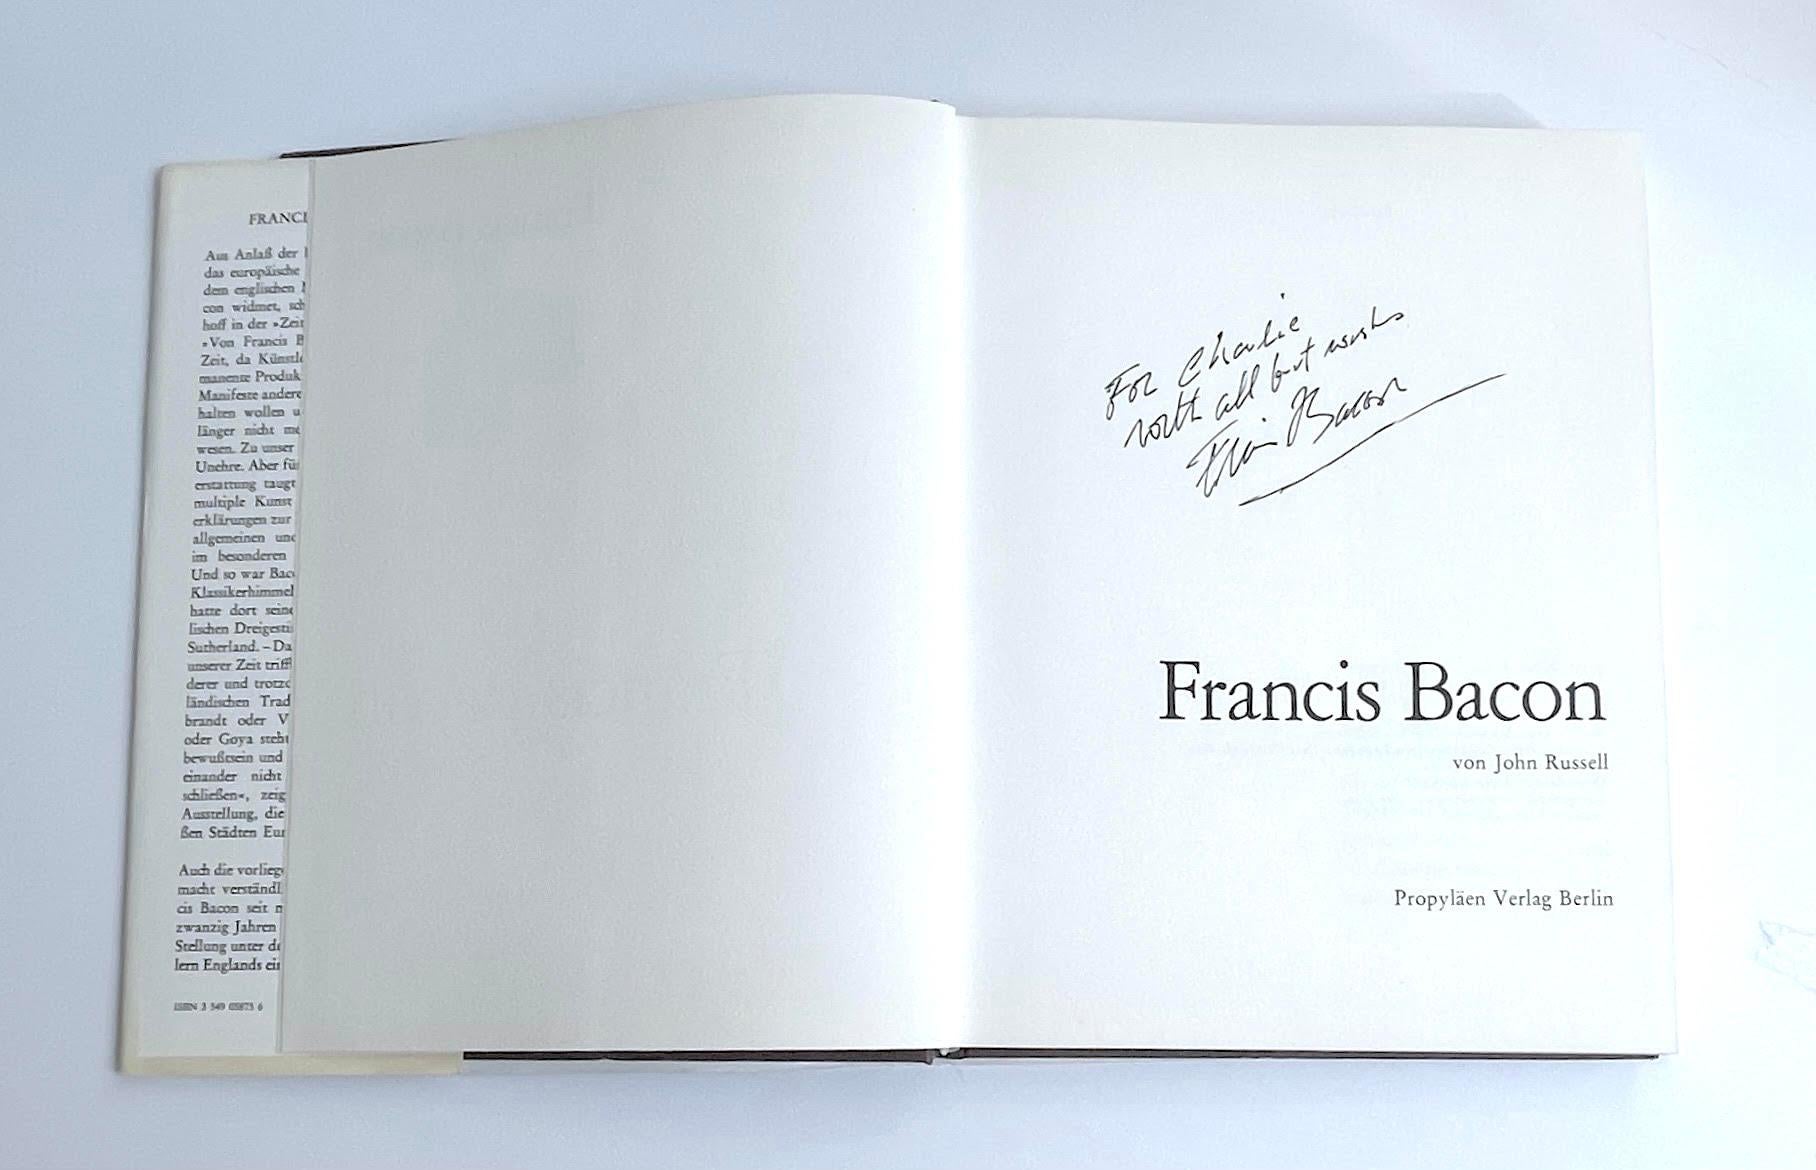 Highly collectible and coveted item:
Francis Bacon von [with] John Russell (Monograph, hand signed and inscribed twice by Francis Bacon), 1972
Hardback monograph with dust jacket (hand signed and inscribed in ink twice)
Hand signed and inscribed by